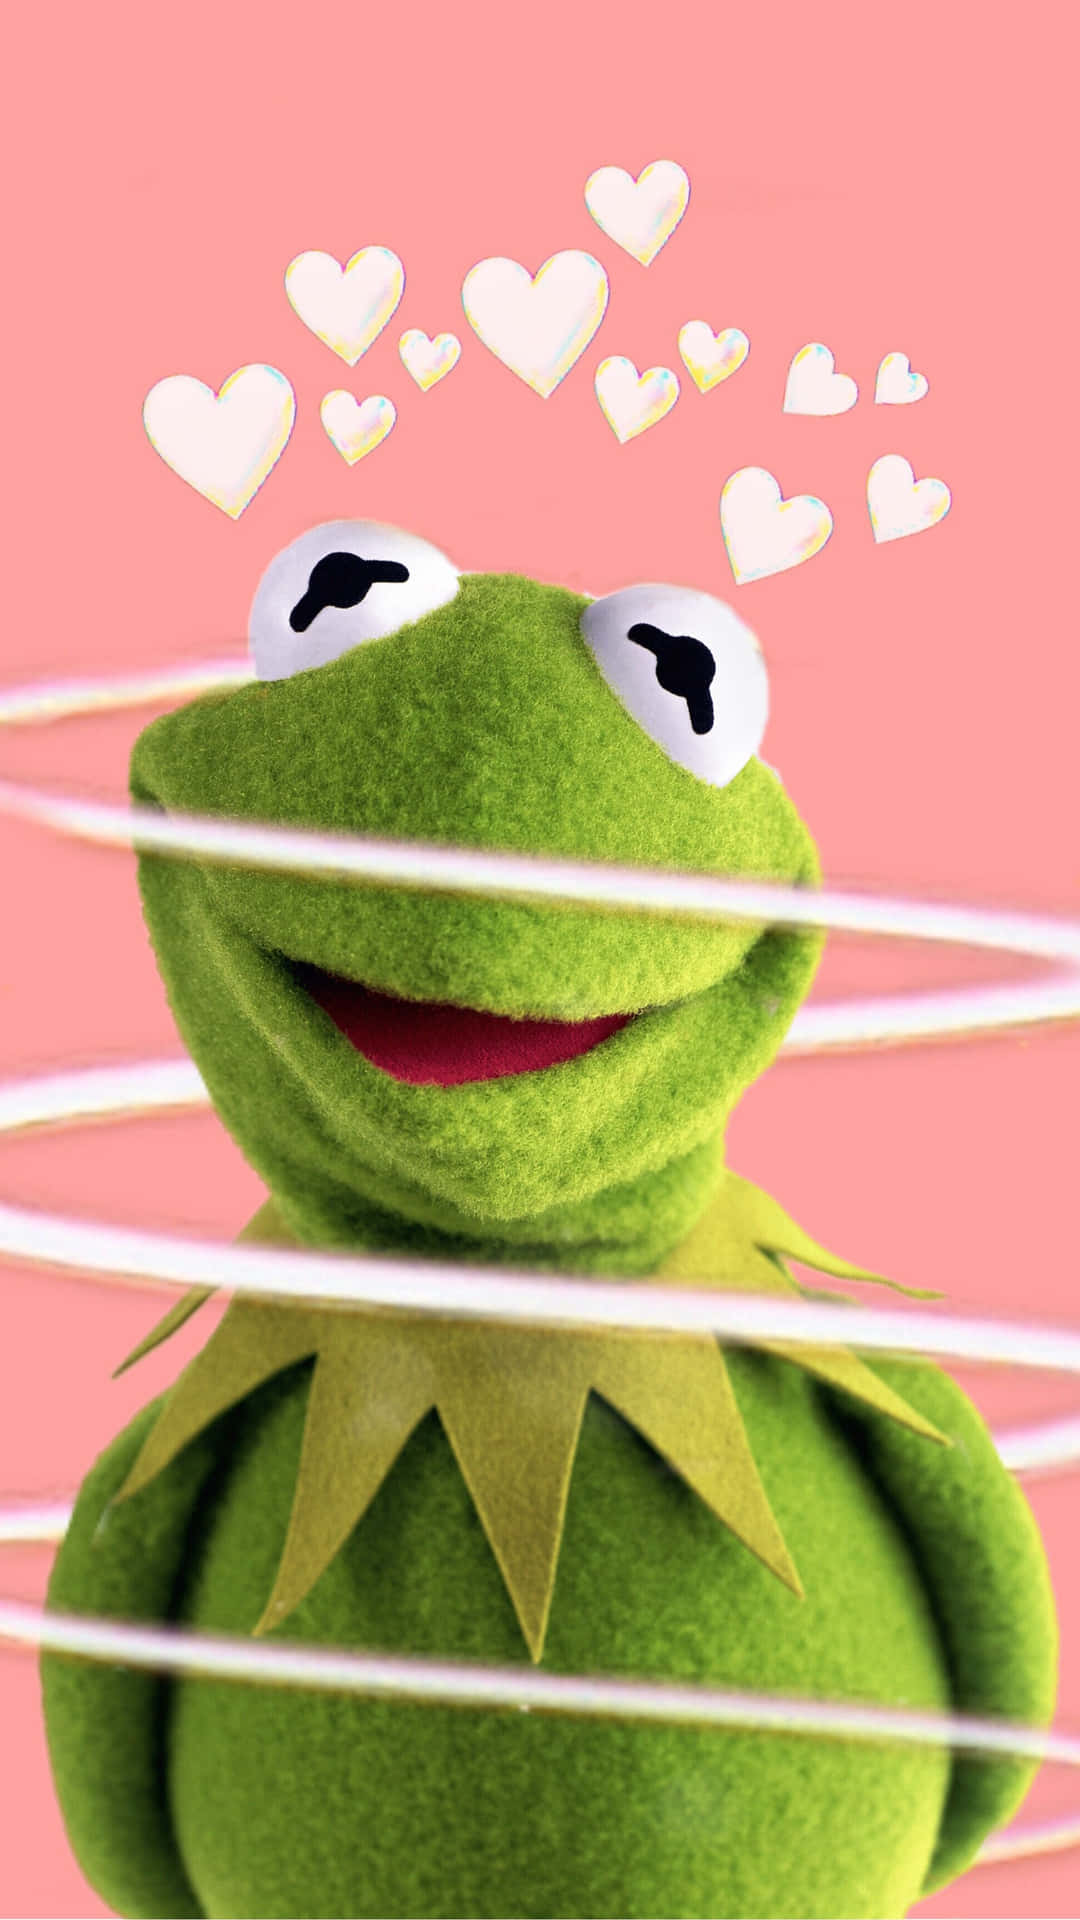 A fun-loving Kermit the Frog dressed up in an aesthetically pleasing way Wallpaper